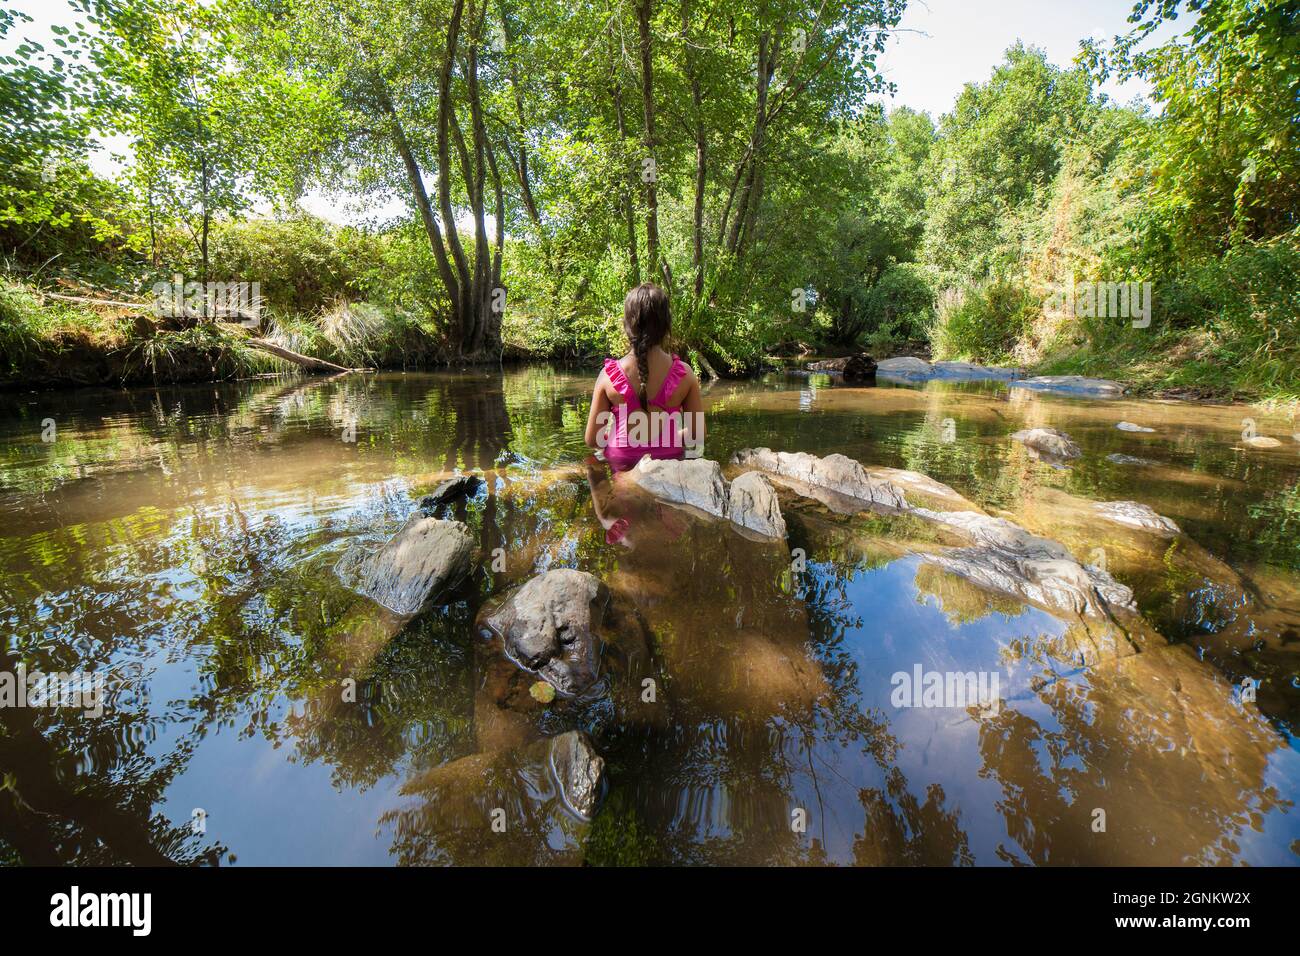 Child girl discovering Gevora river, La Codosera, Badajoz, Extremadura, Spain. Idyllic location of crystal clear waters and riverside forests Stock Photo